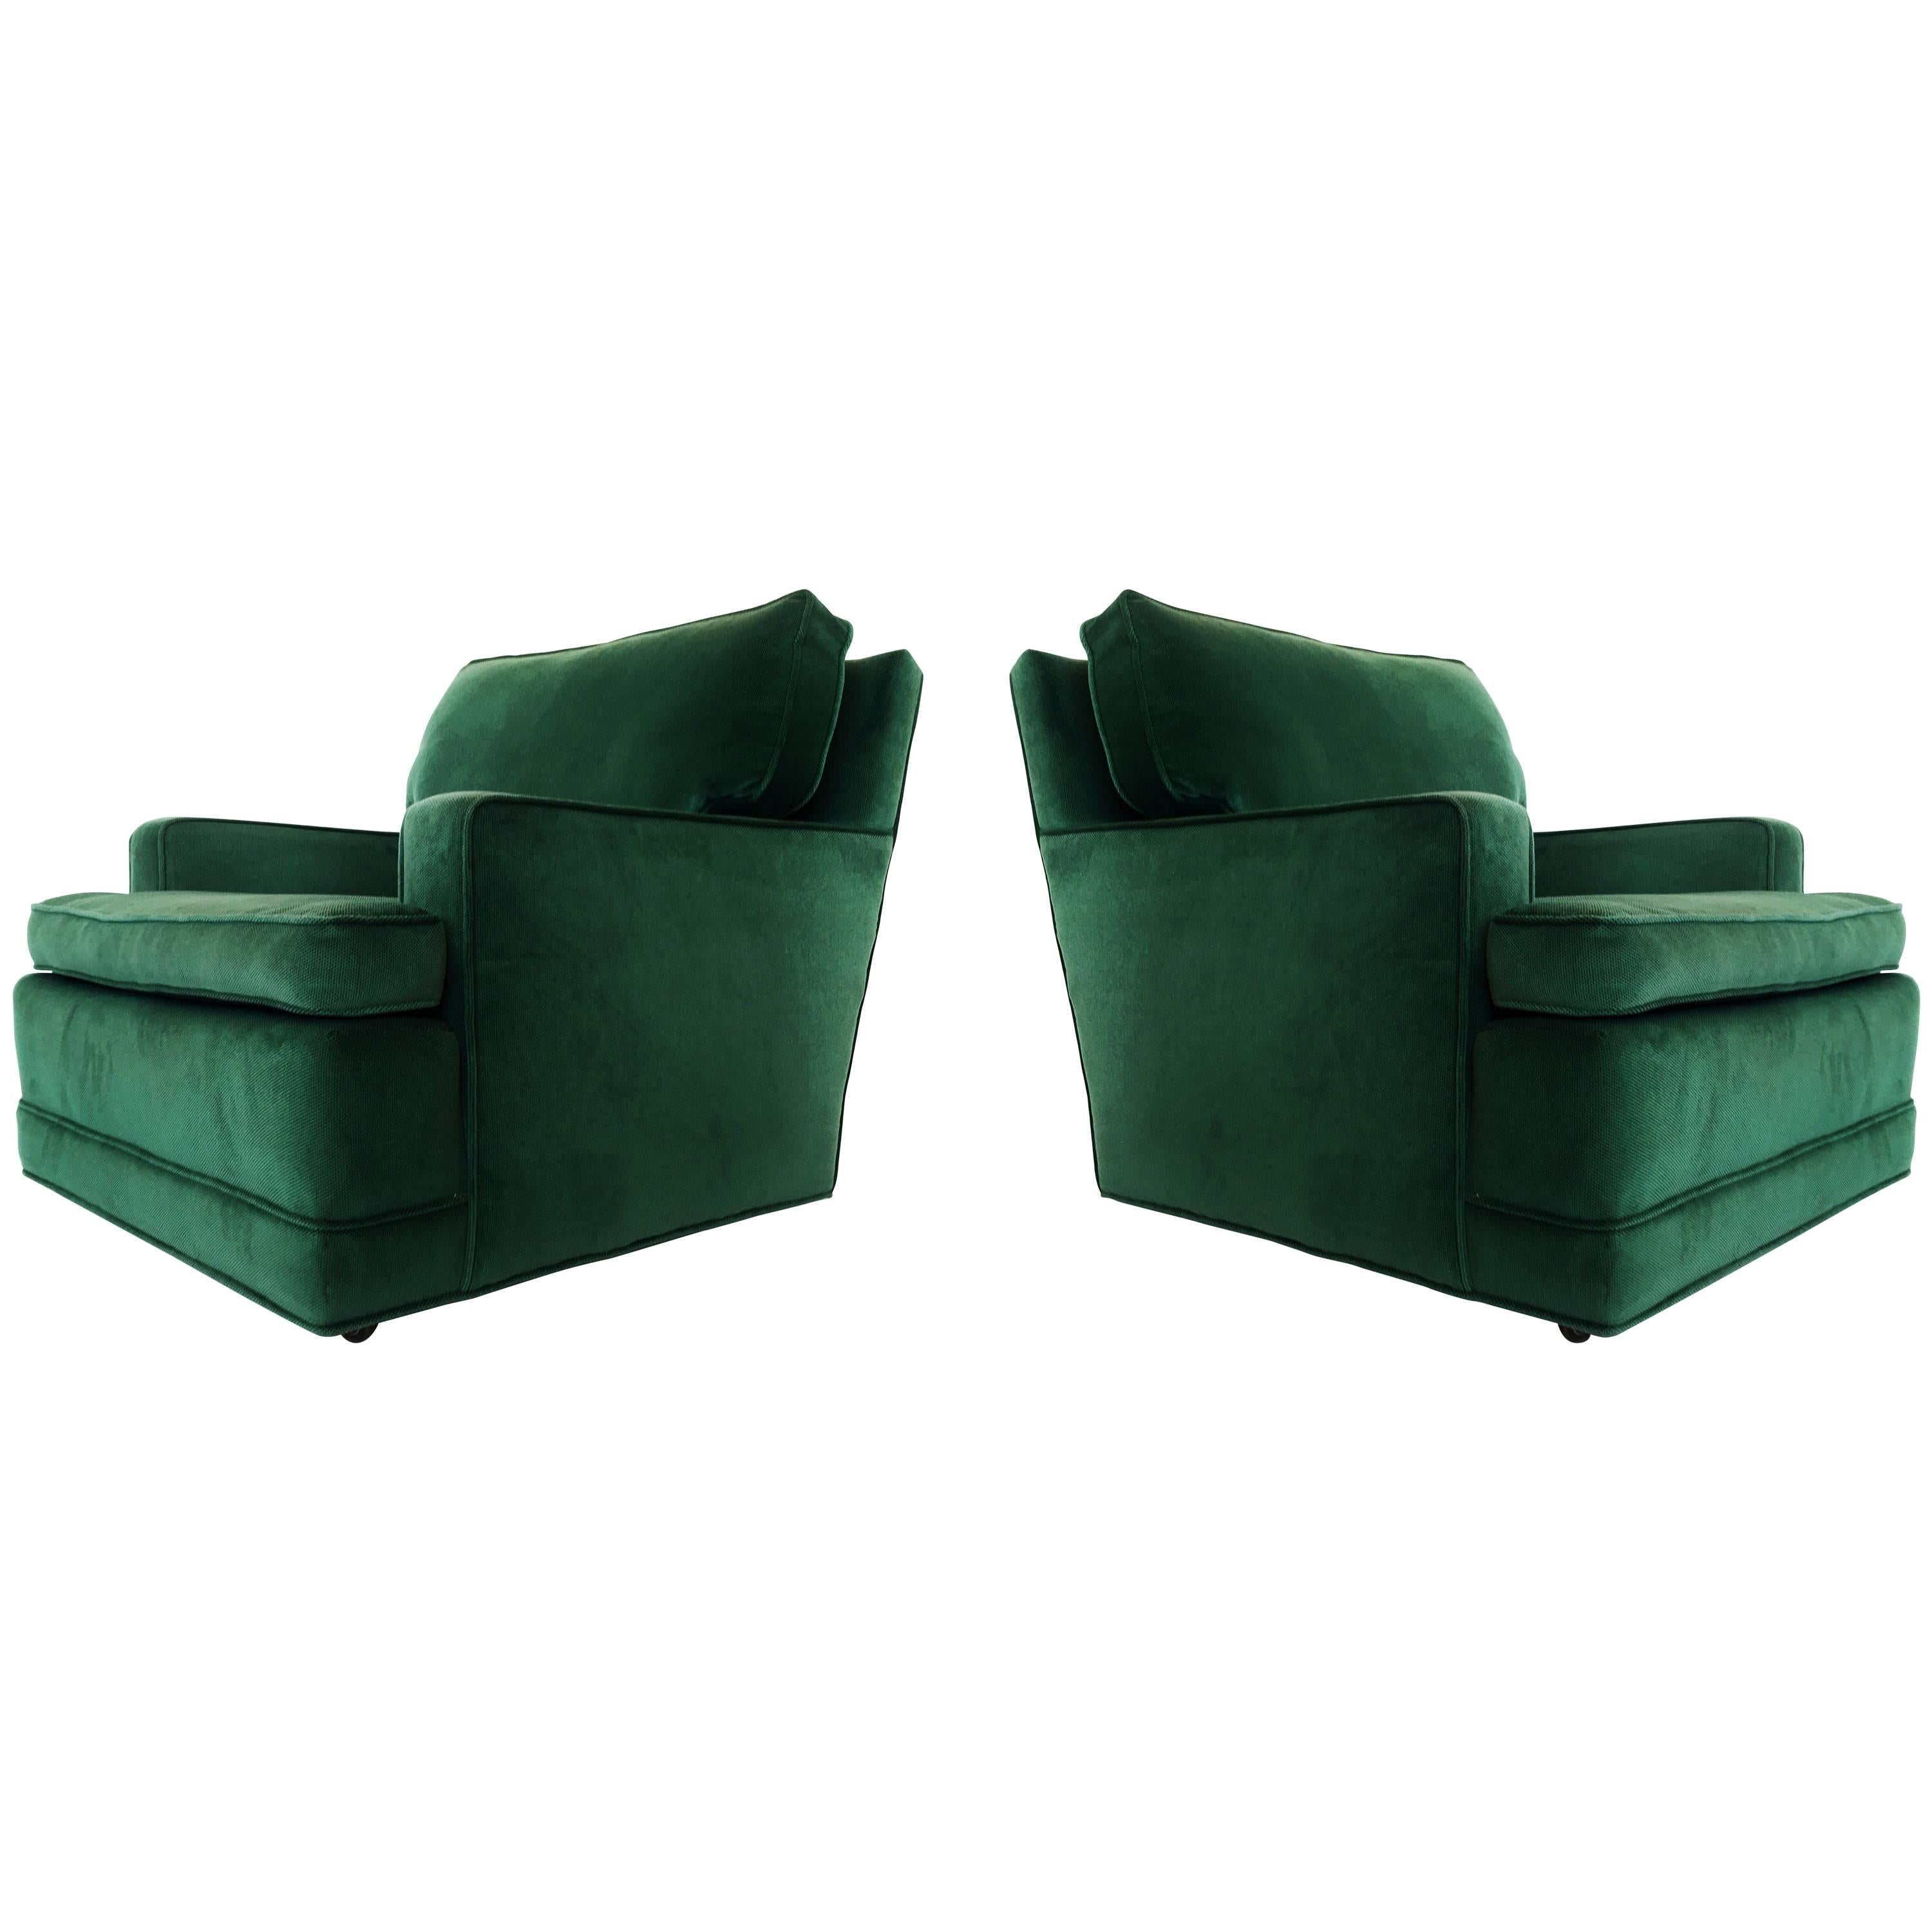 Pair of Billy Haines Style "Seniah" Chairs in Green Upholstery For Sale